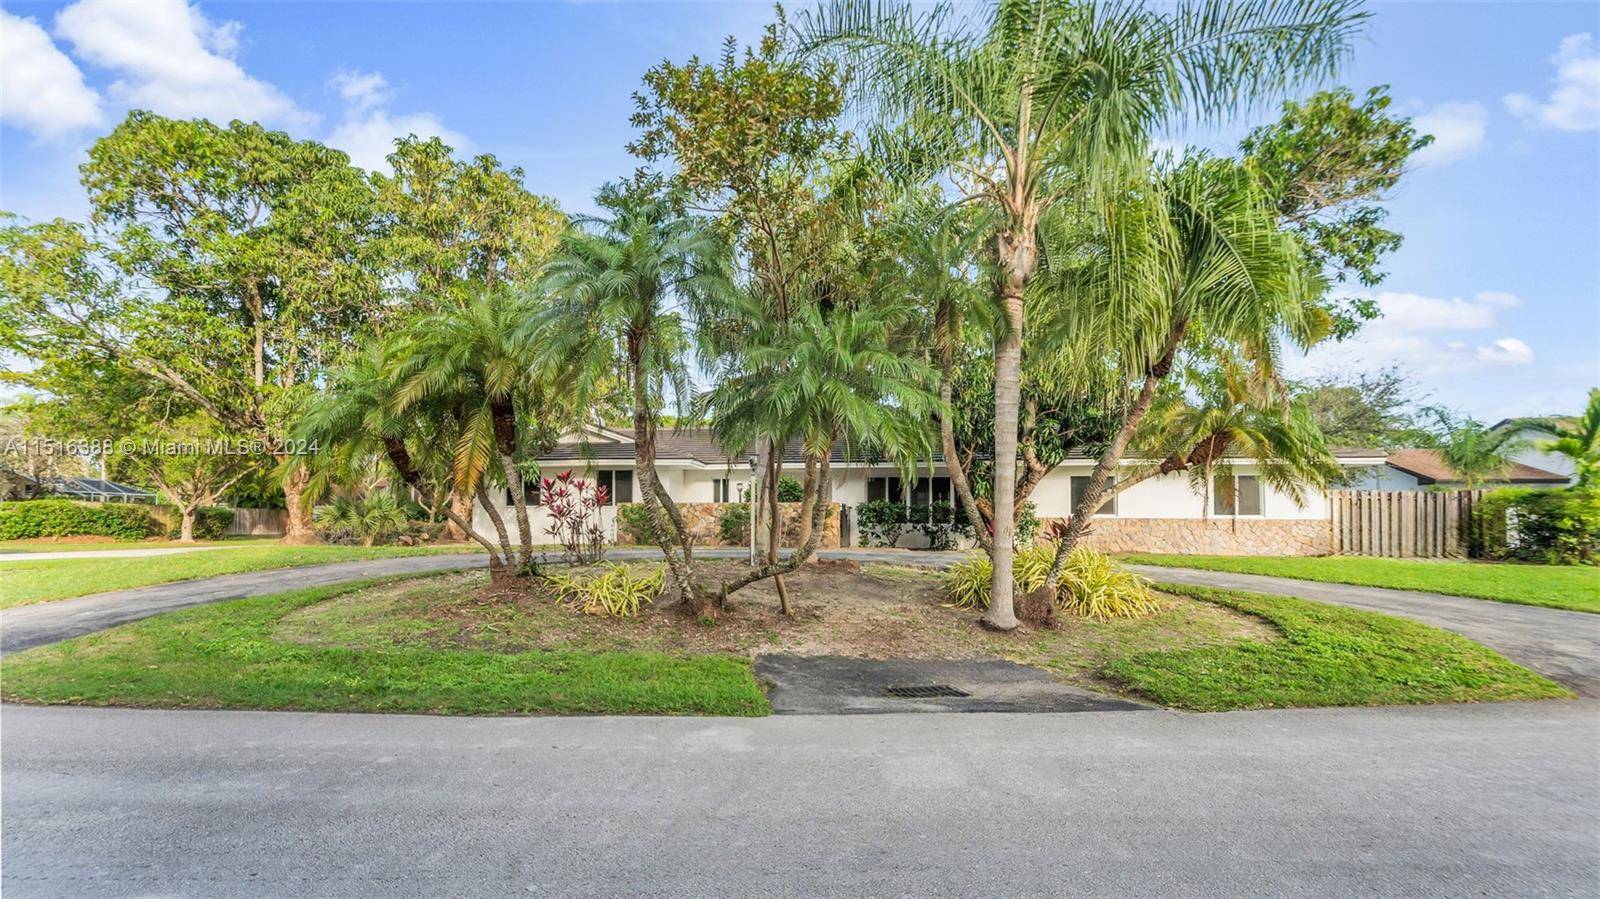 Discover your home in the sought after neighborhood of Palmetto Bay.